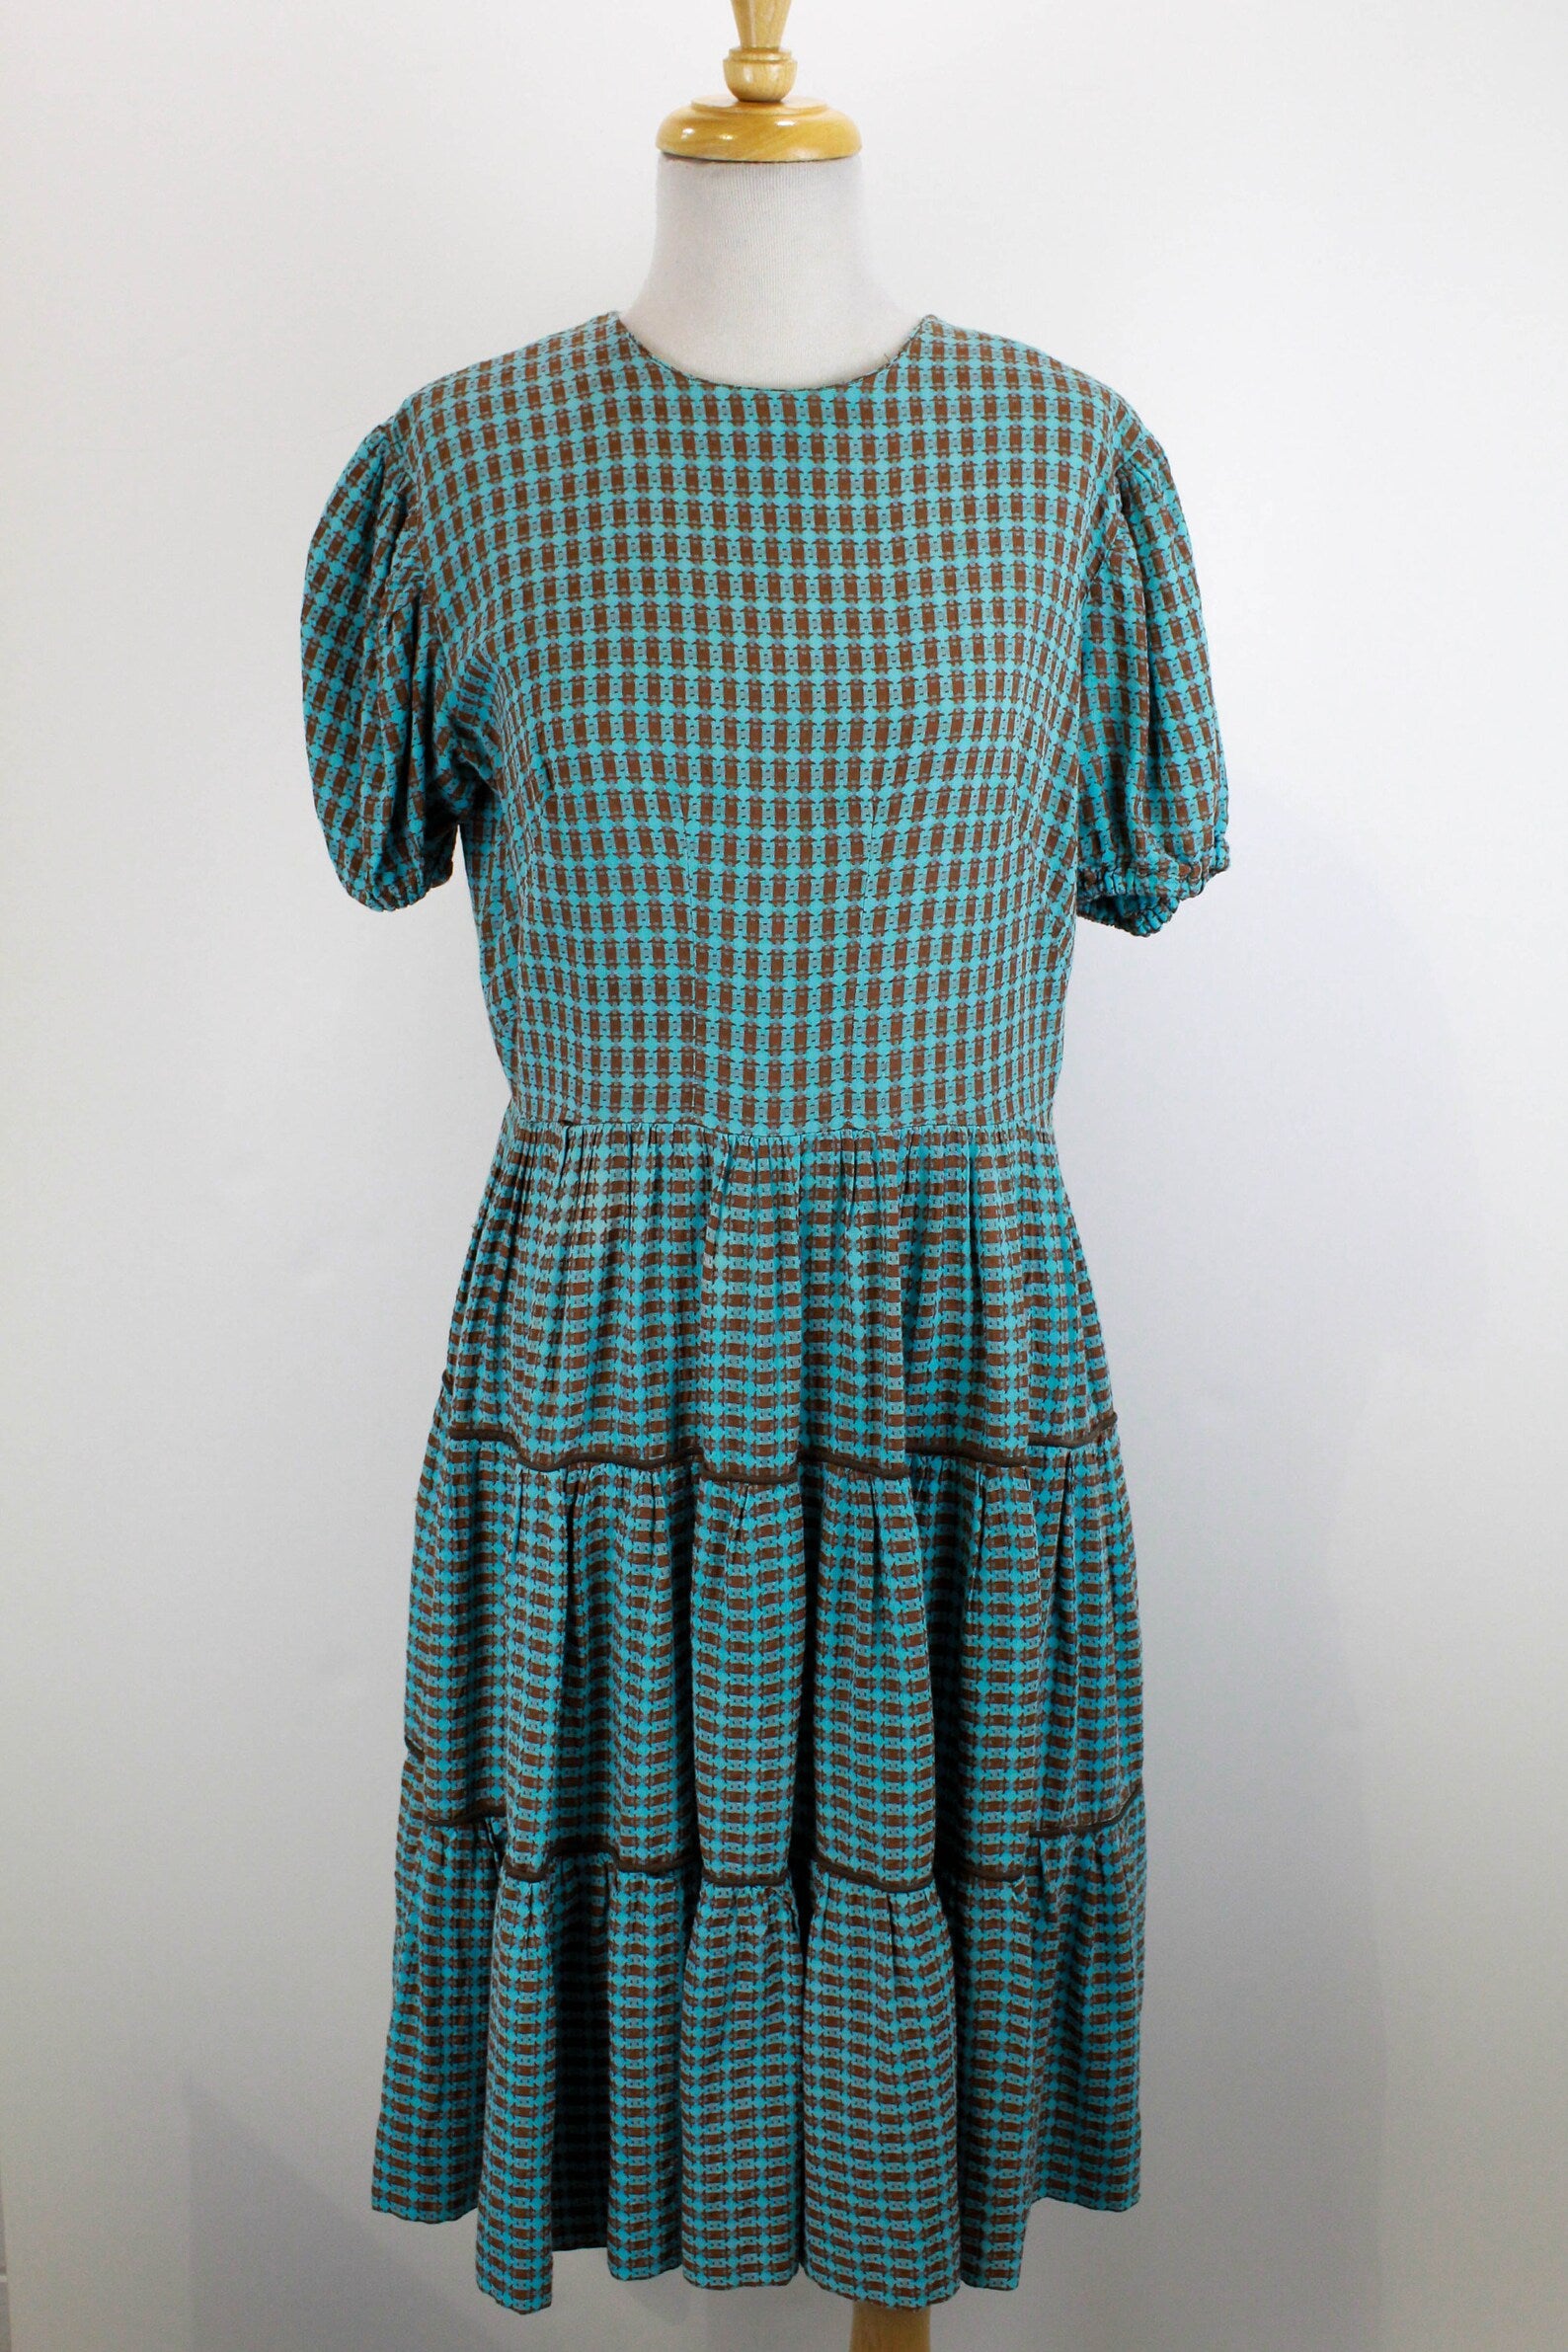 Vintage Reproduction Checked Dress, 1940s Style Prairie Dress with Puff Sleeves, Tiered Skirt, Midi Length, Gingham, Medium/Large